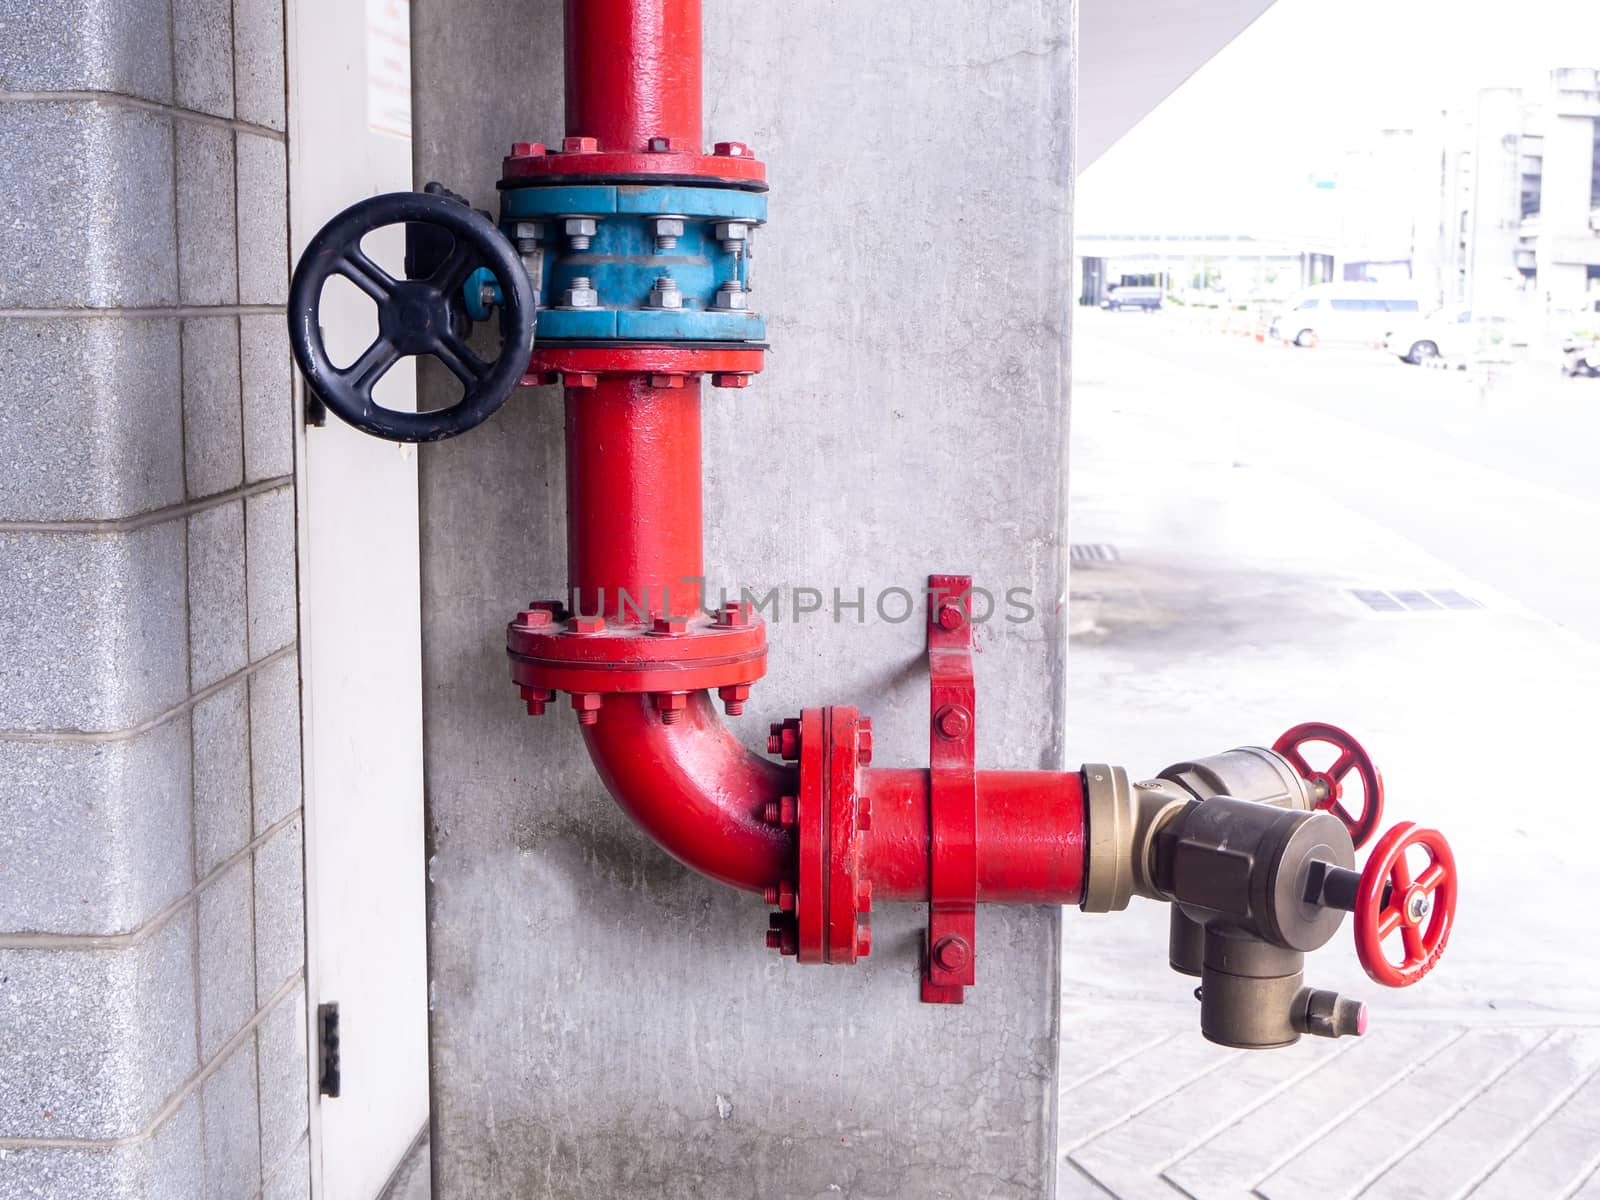 water pipe and fire valve  system control fighting panel by shutterbird